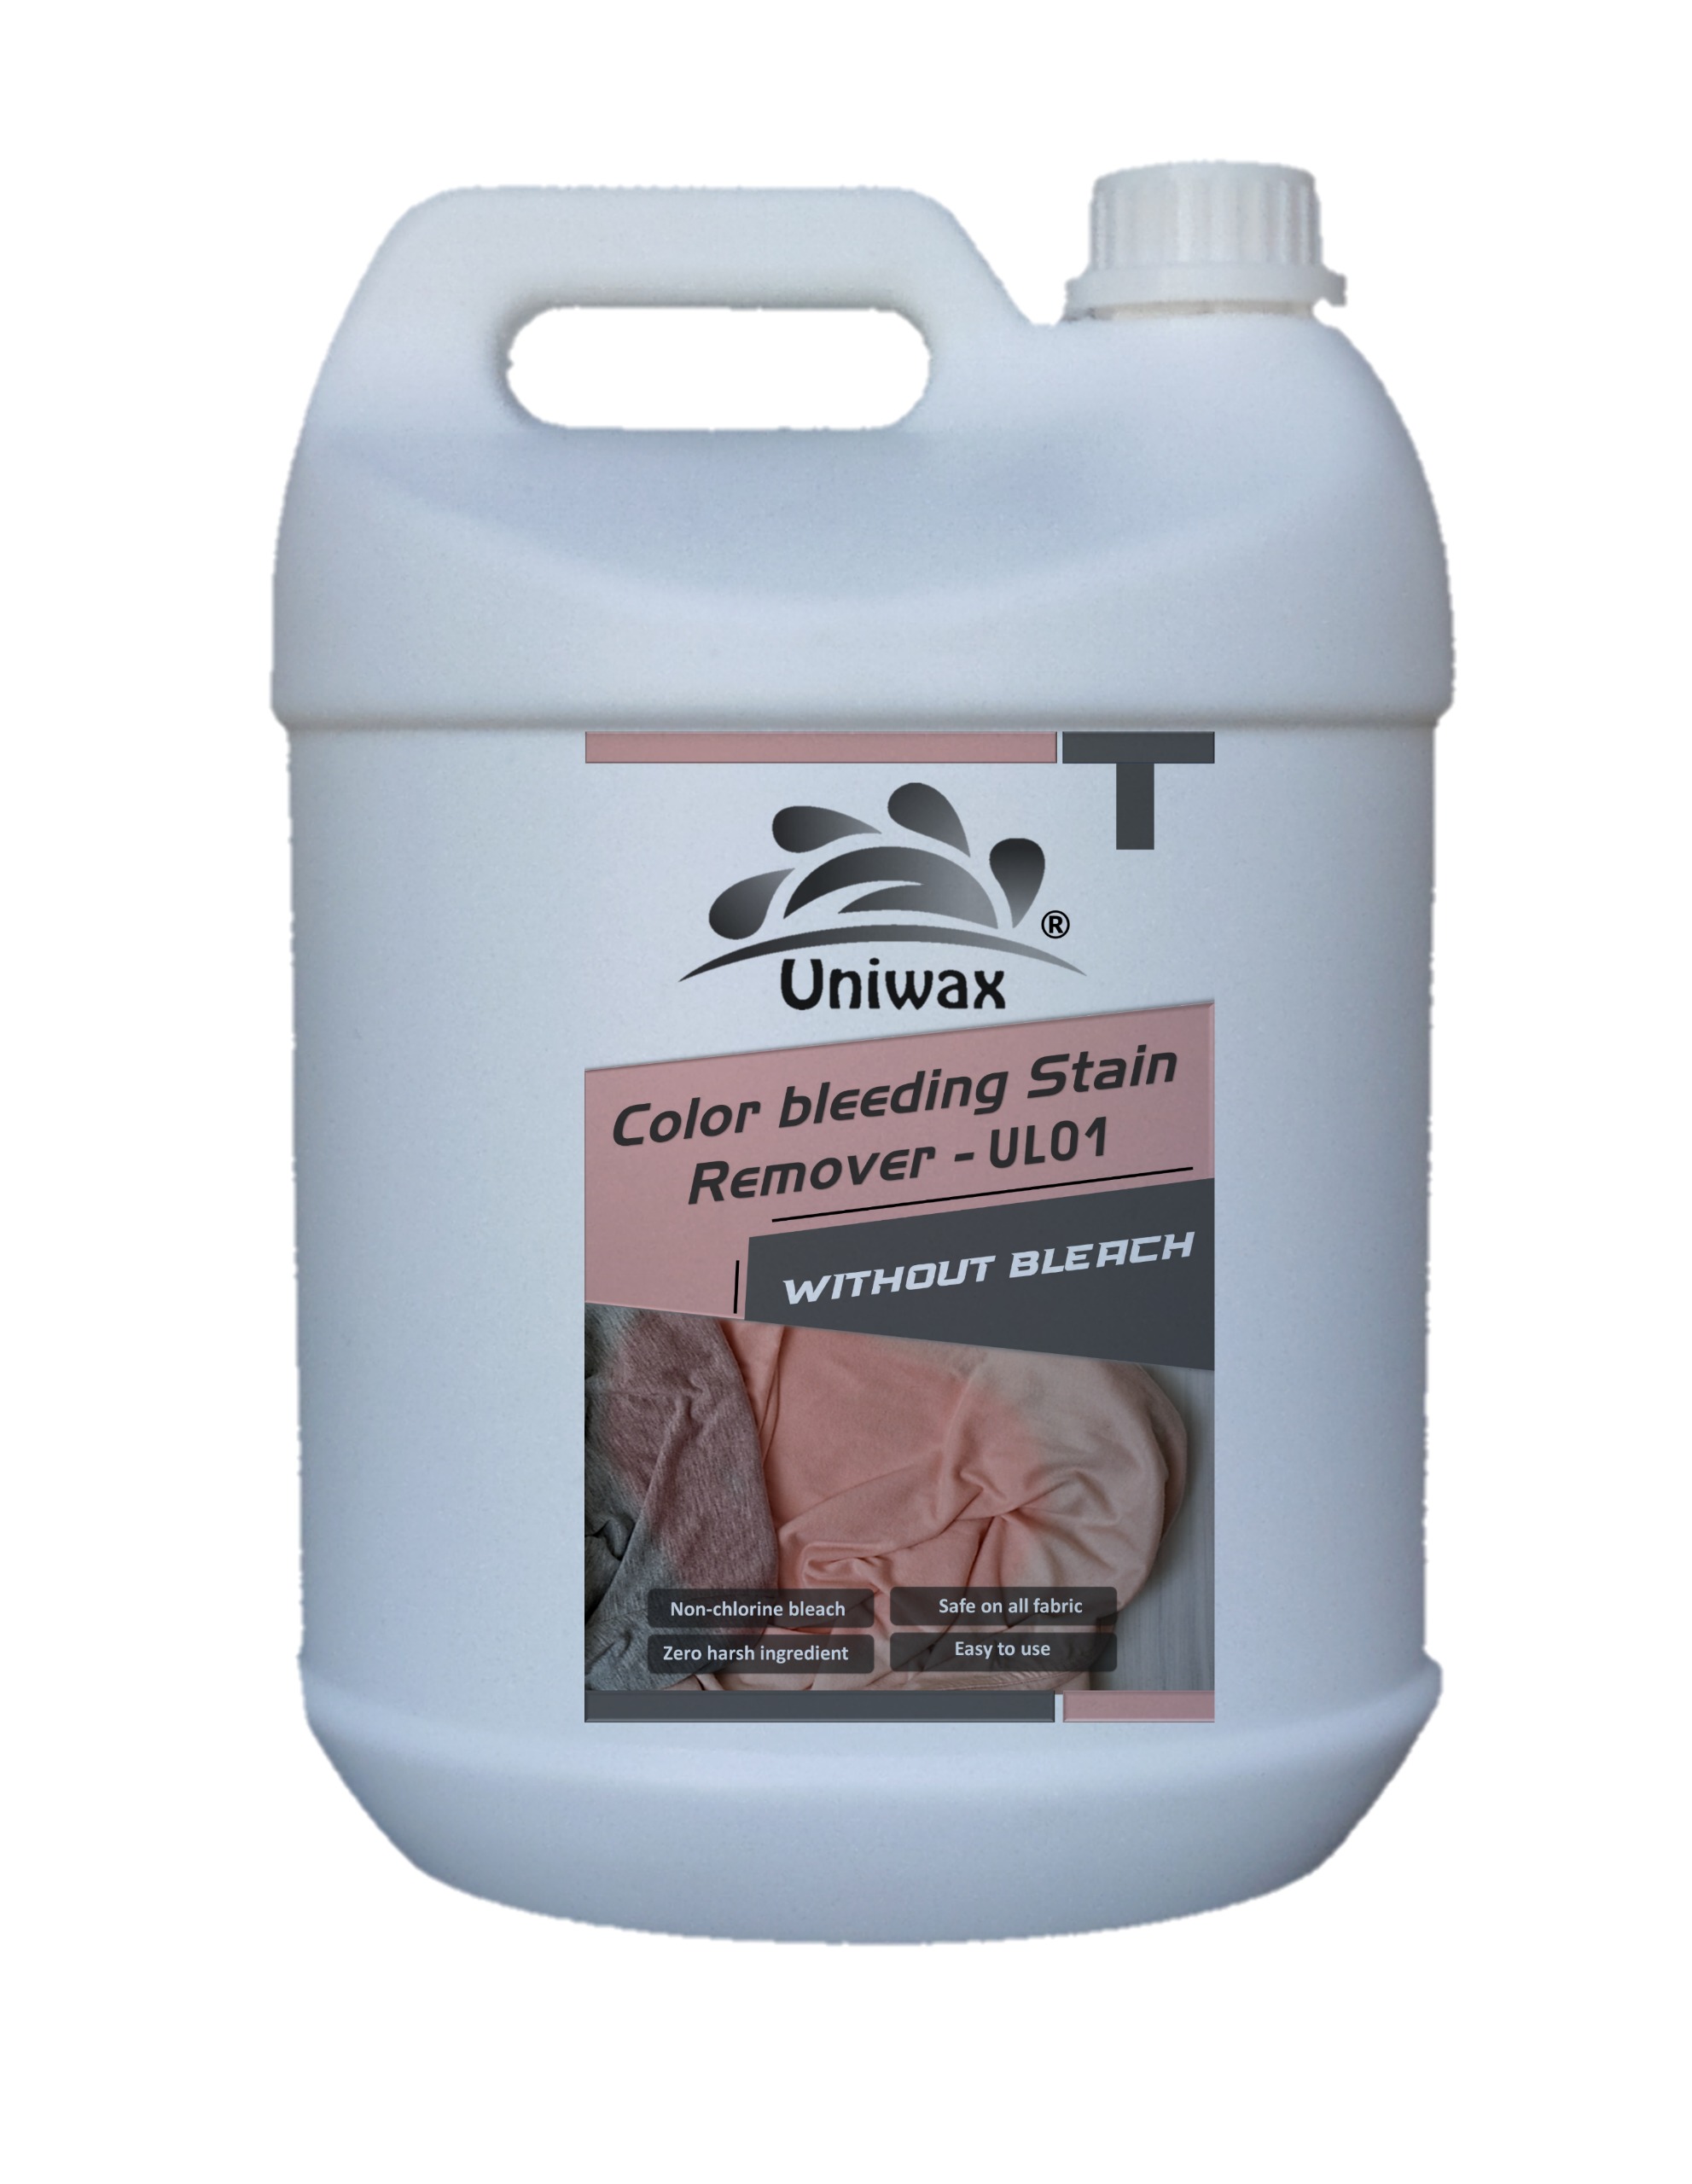 uniwax color bleeding stain remover / UL01 / Colour Cloth stain